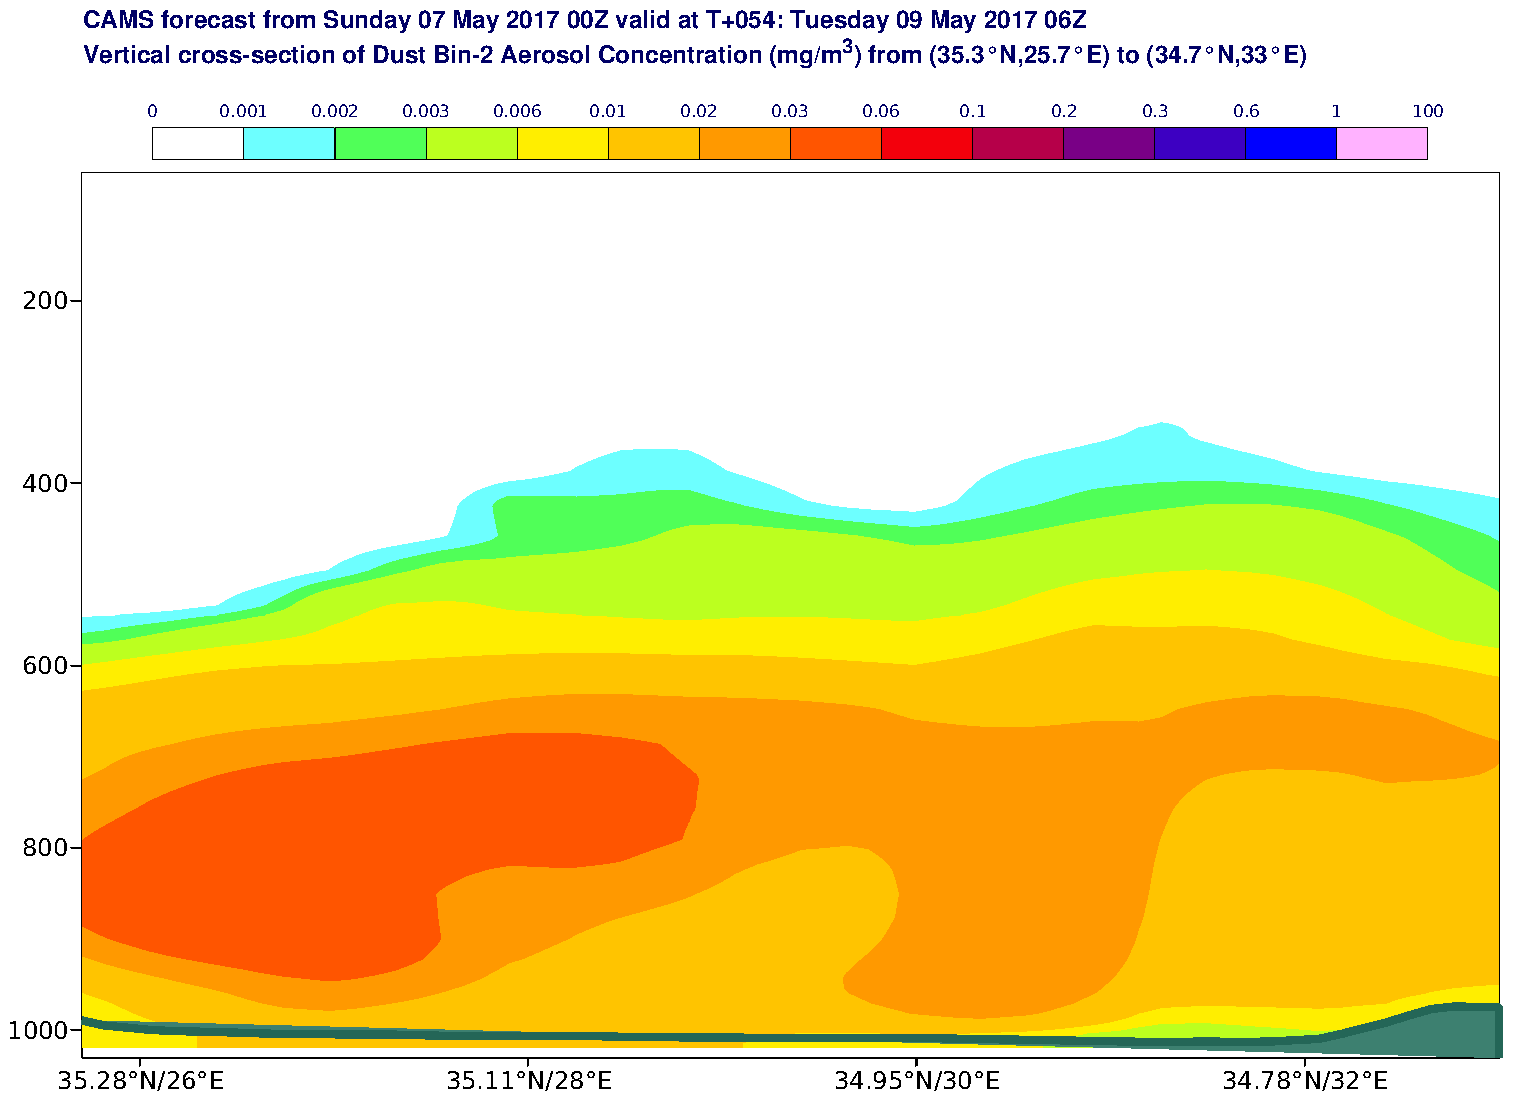 Vertical cross-section of Dust Bin-2 Aerosol Concentration (mg/m3) valid at T54 - 2017-05-09 06:00